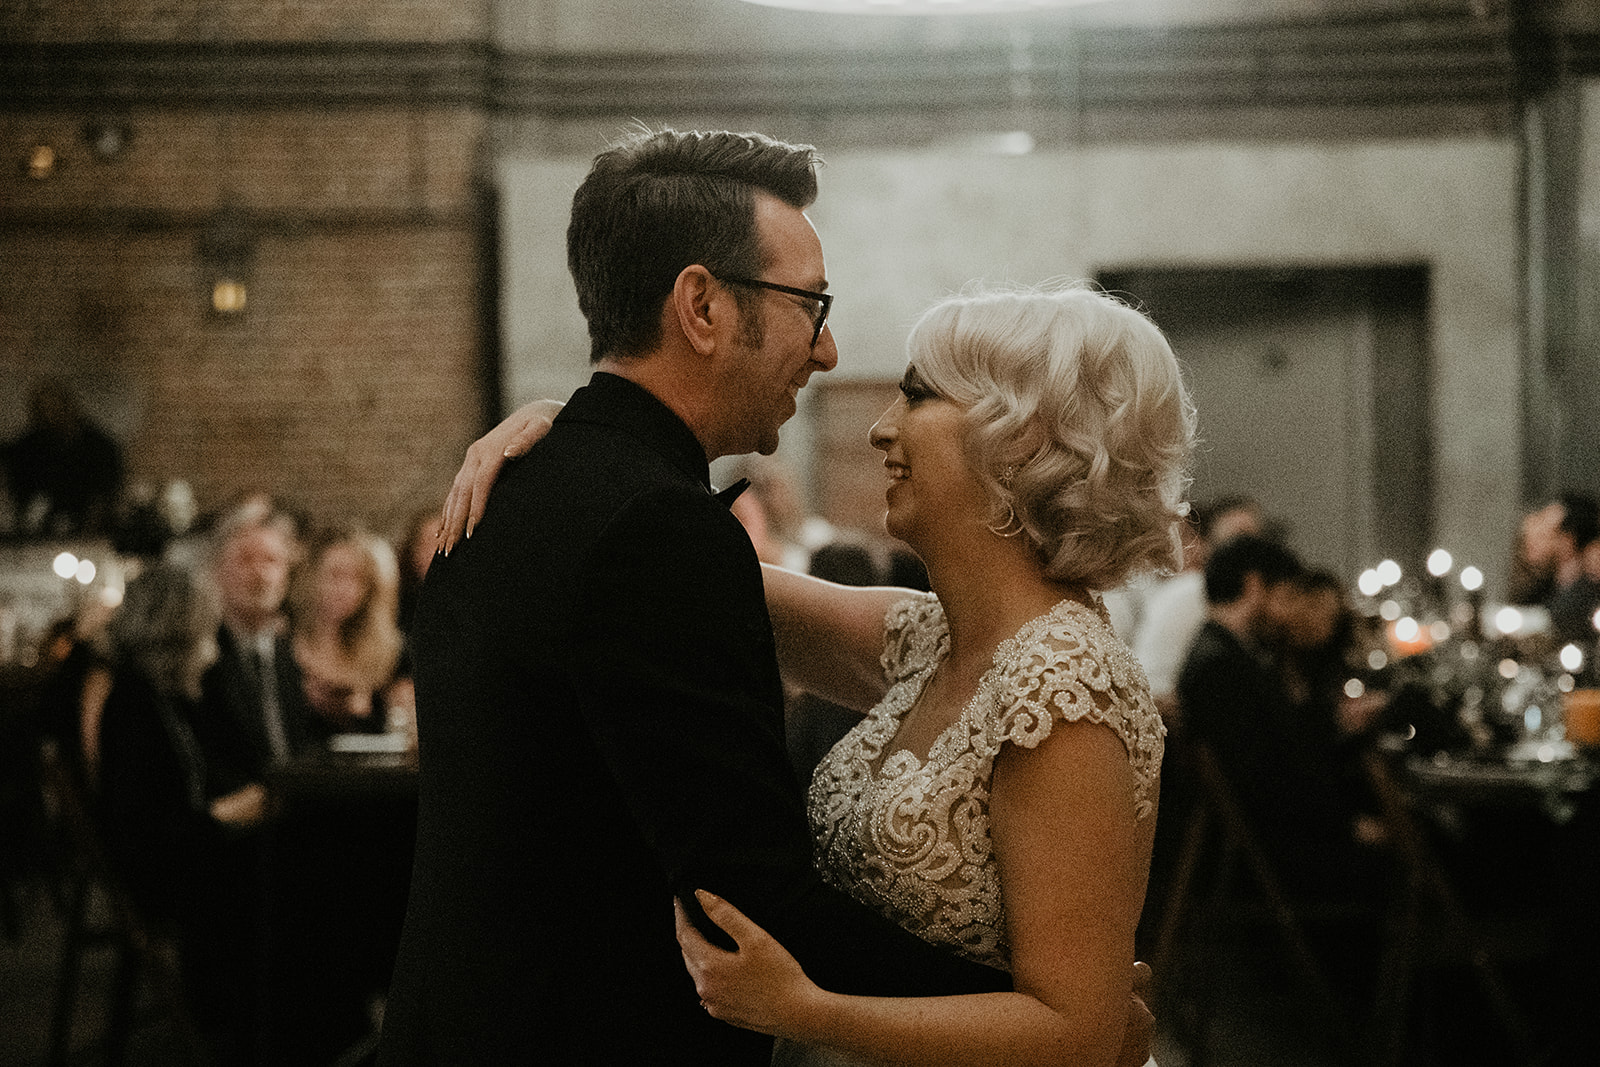 bridal couple's first dance at fall halloween wedding 